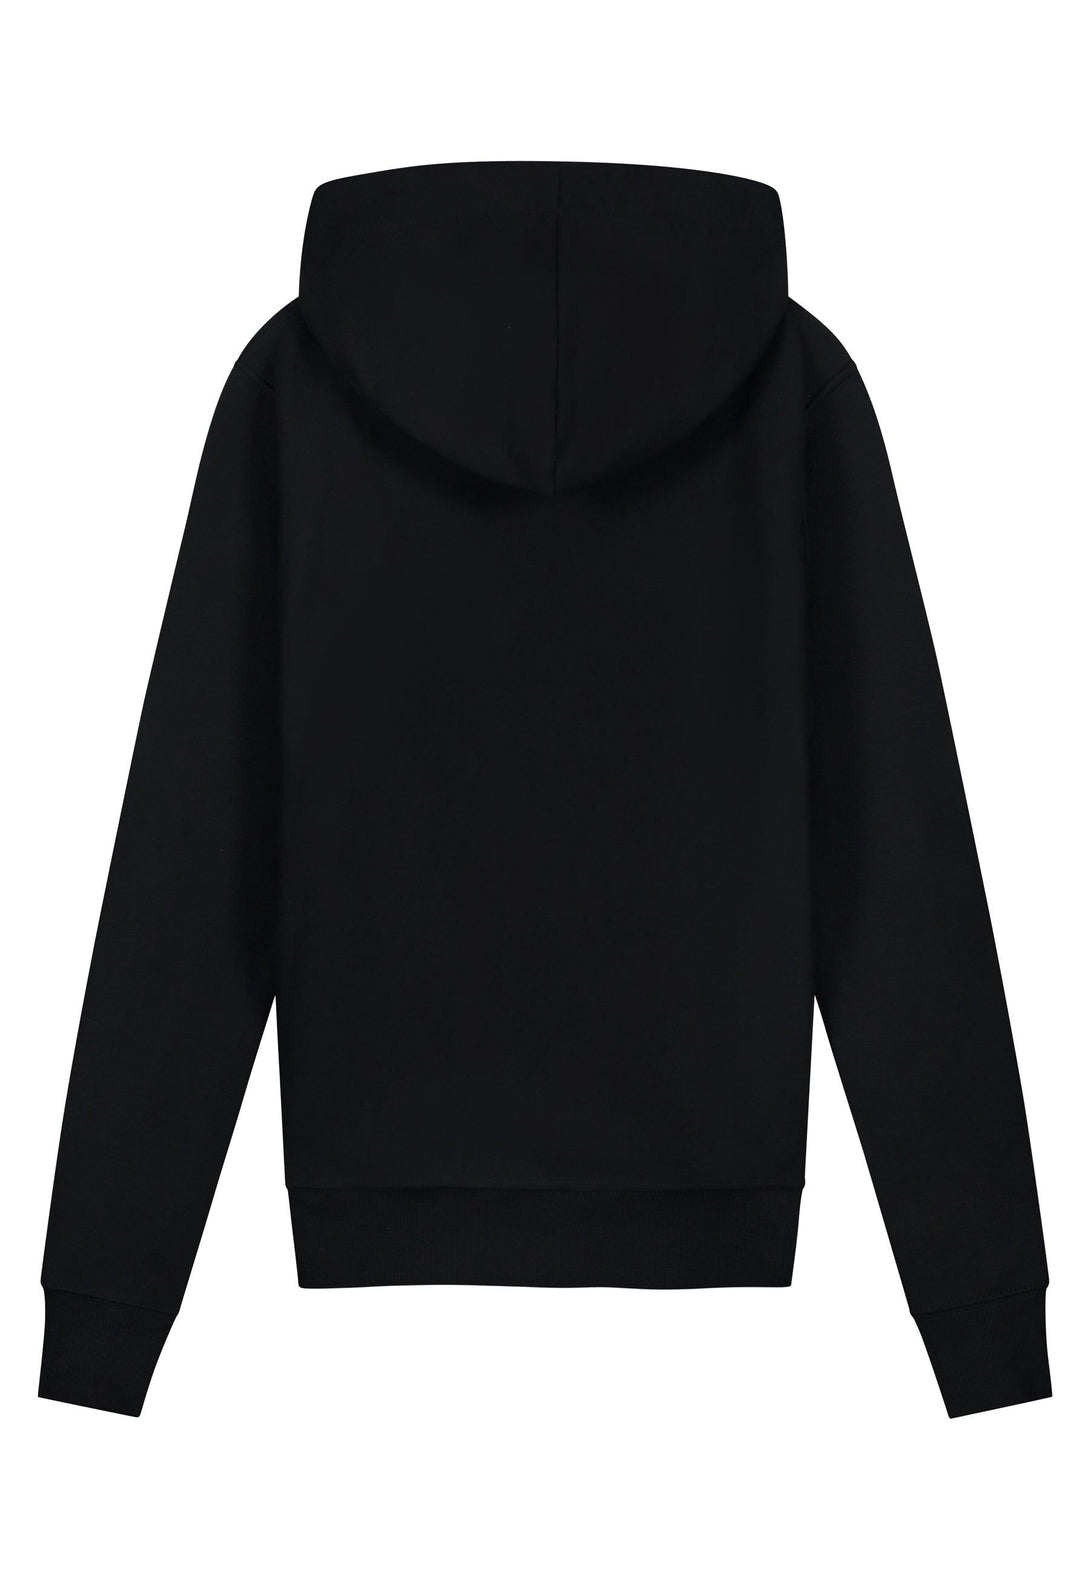 Black hoodie Amsterdam Artwork Collect Label – The